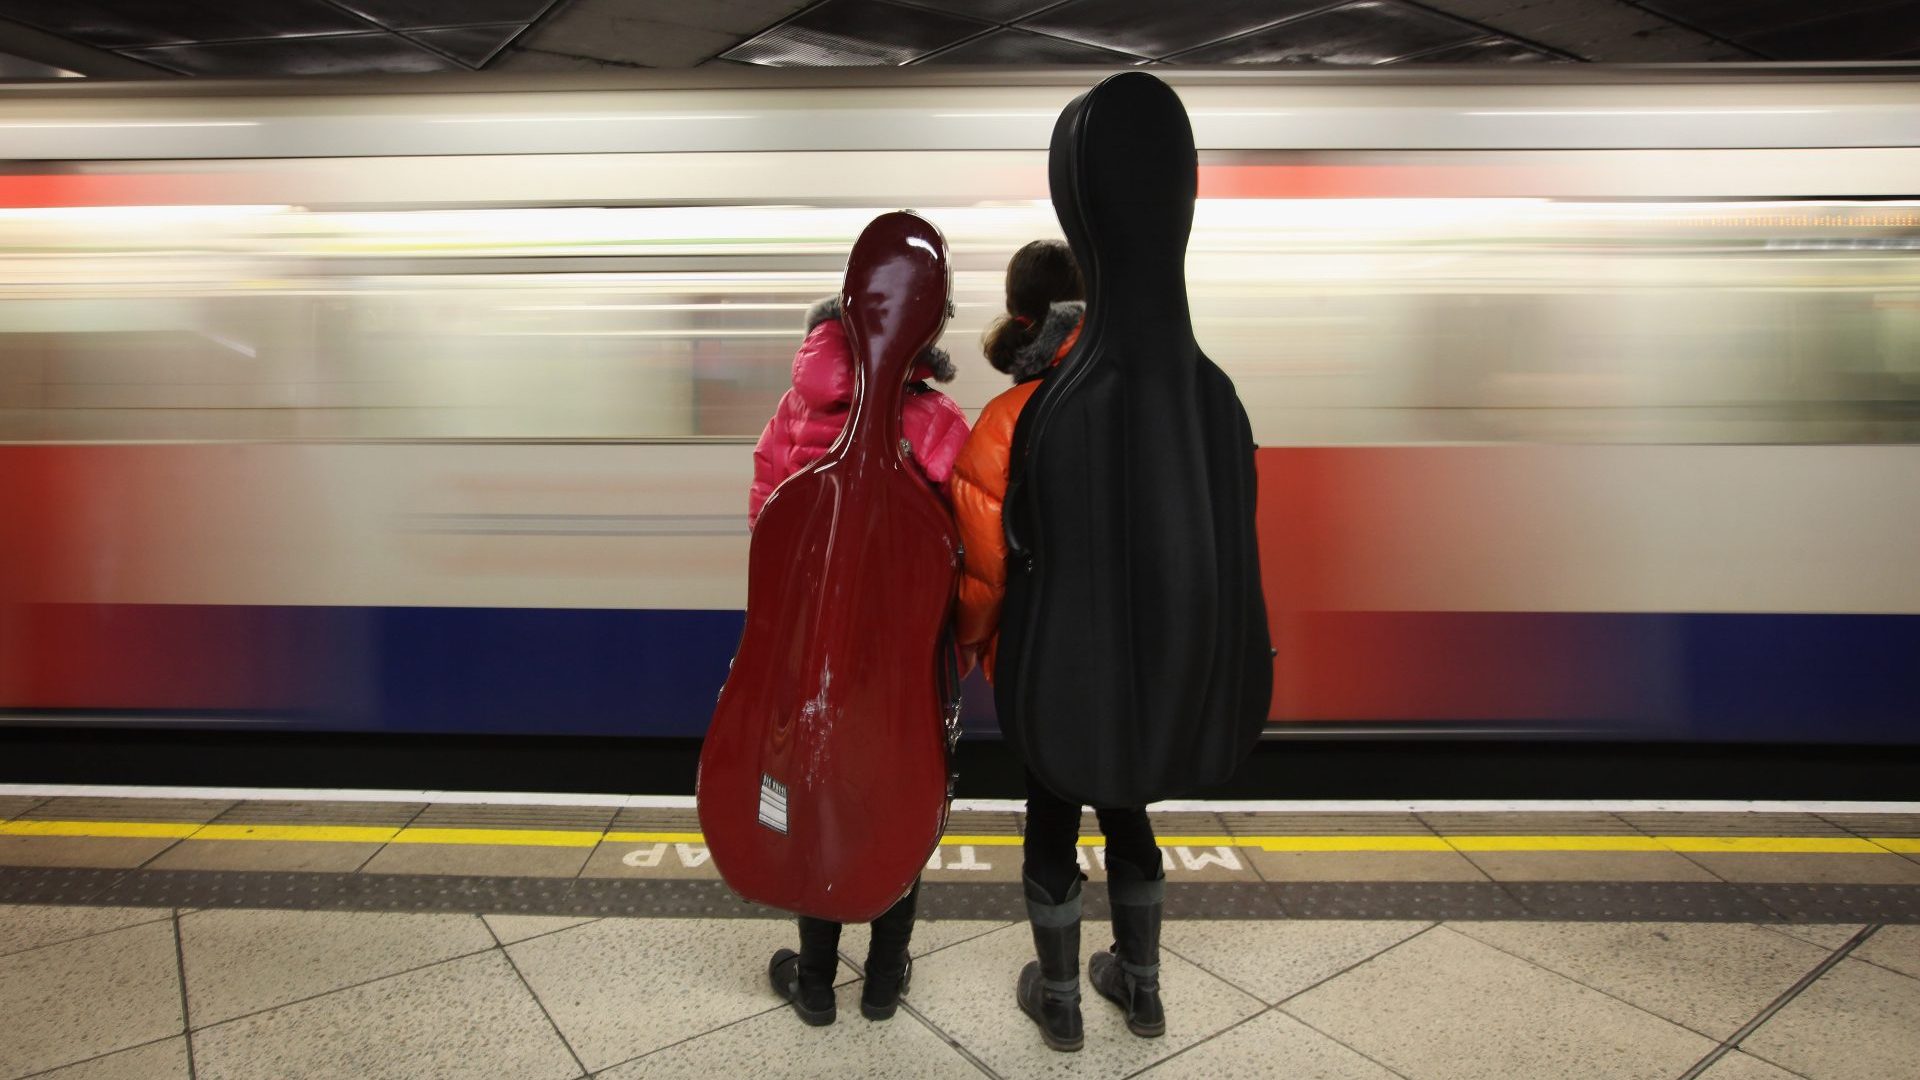 Two girls carrying cellos wait for a train on London Underground's Westminster Station (Photo by Dan Kitwood/Getty Images)